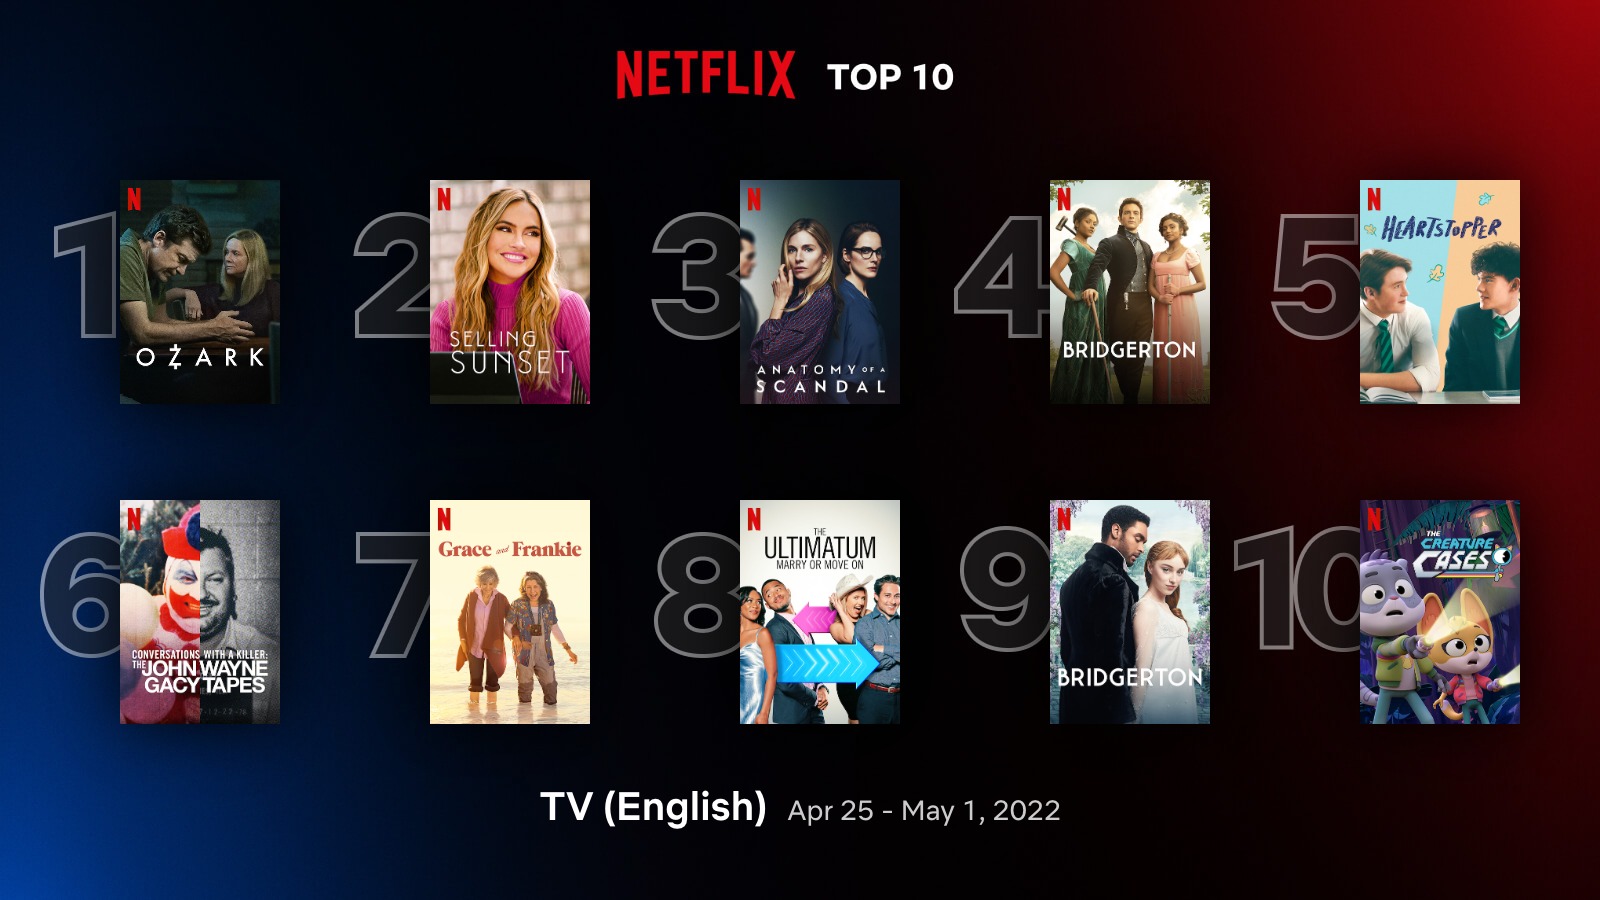 The 10 most popular series on Netflix this week May 2022